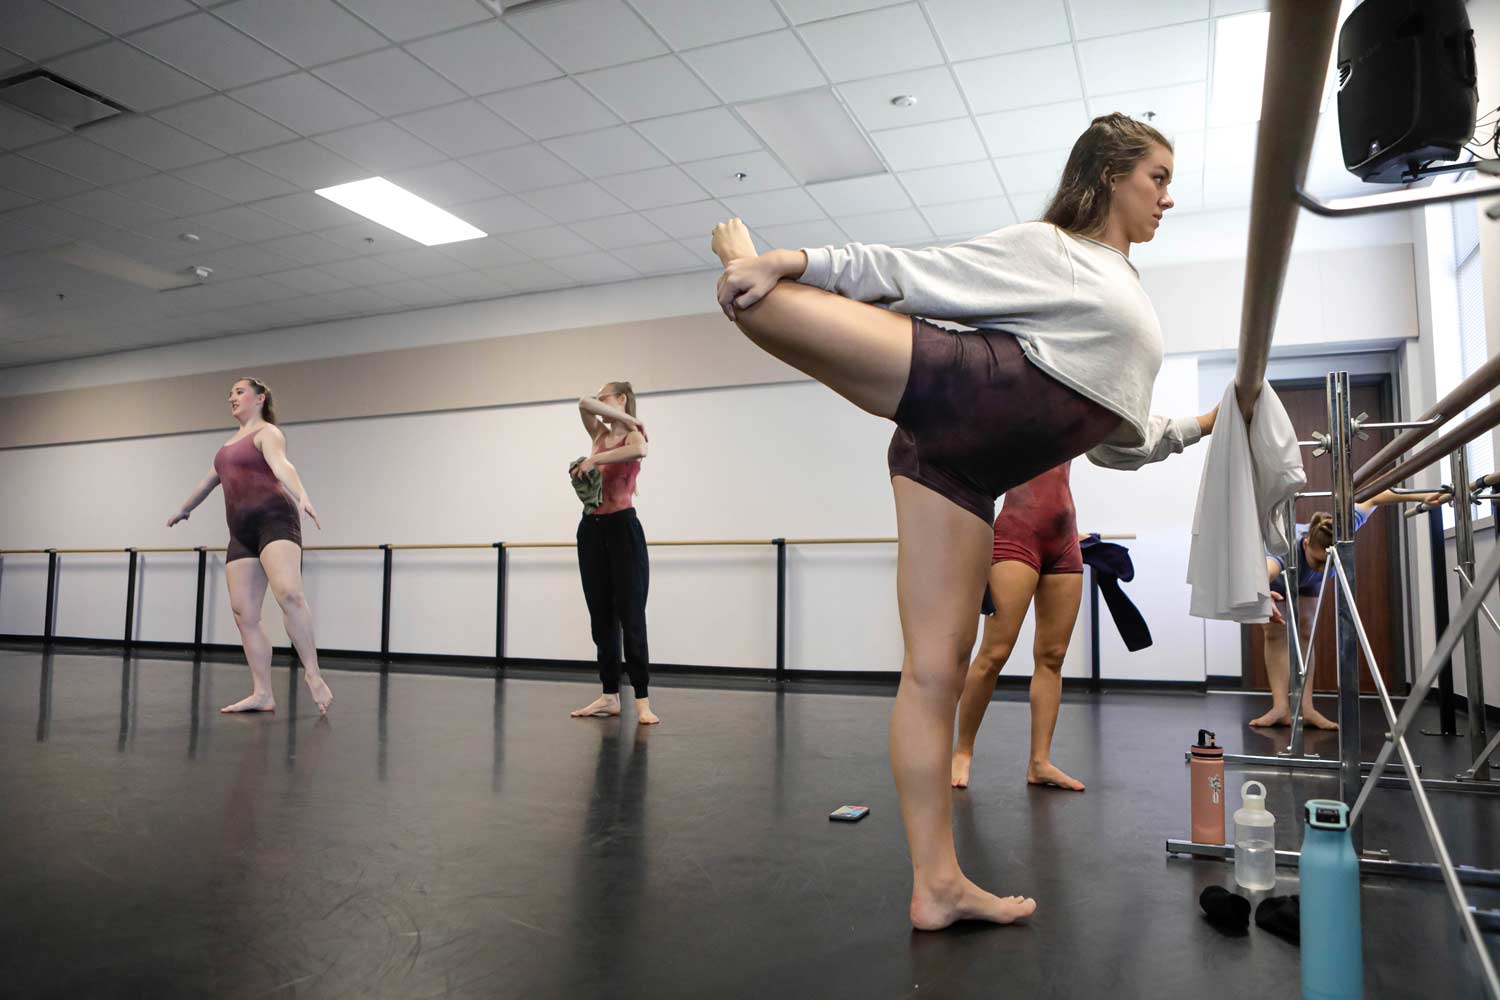 Students participate in a ballet course at the PEAP building on West Campus